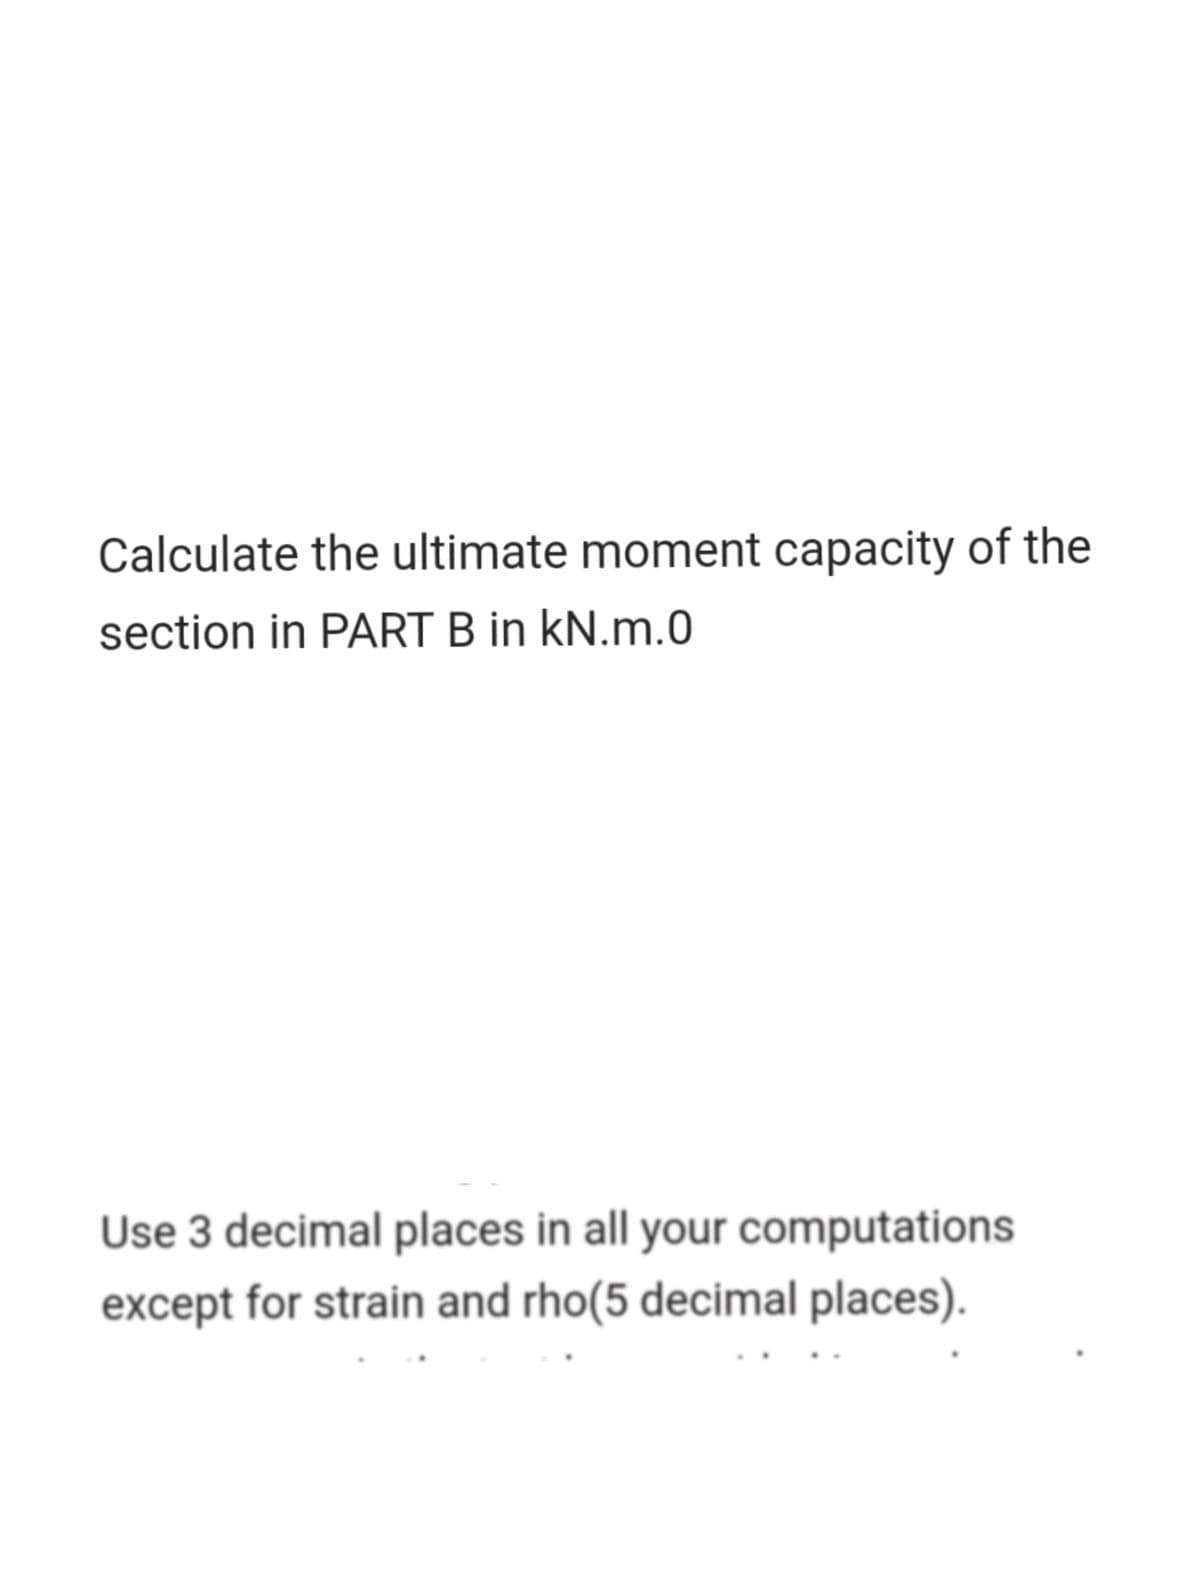 Calculate the ultimate moment capacity of the
section in PART B in kN.m.0
Use 3 decimal places in all your computations
except for strain and rho(5 decimal places).